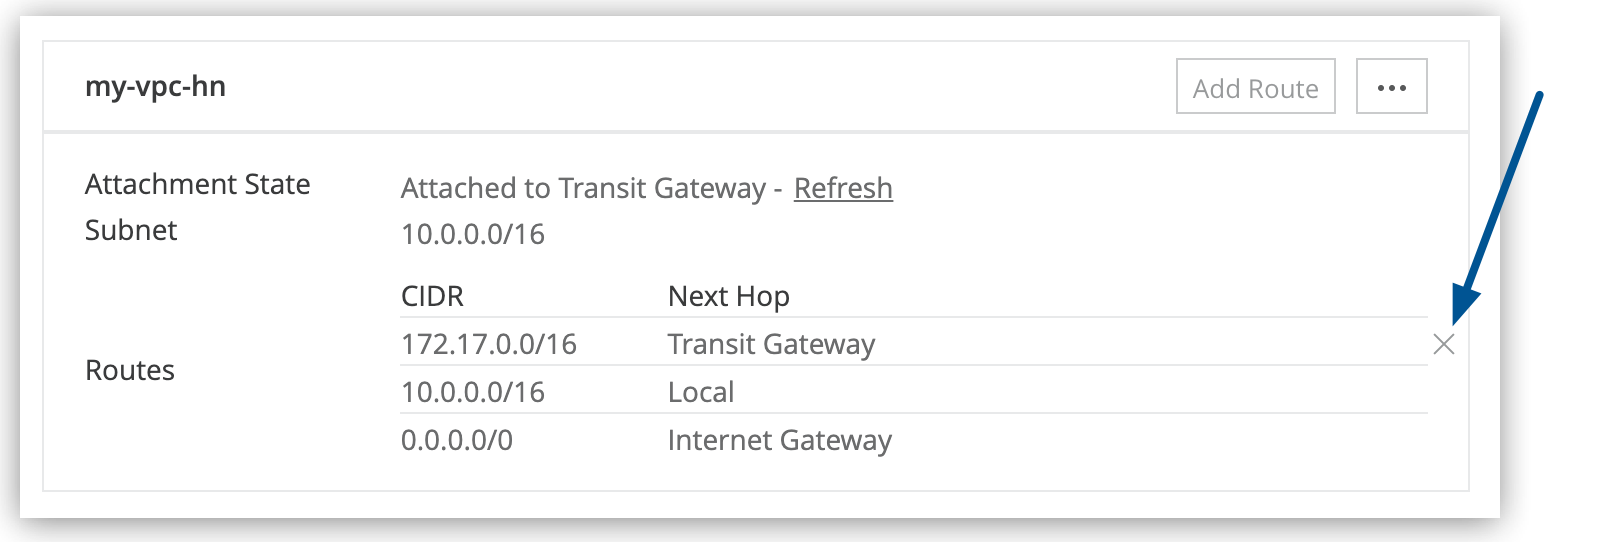 Remove route icon in the VPCs section